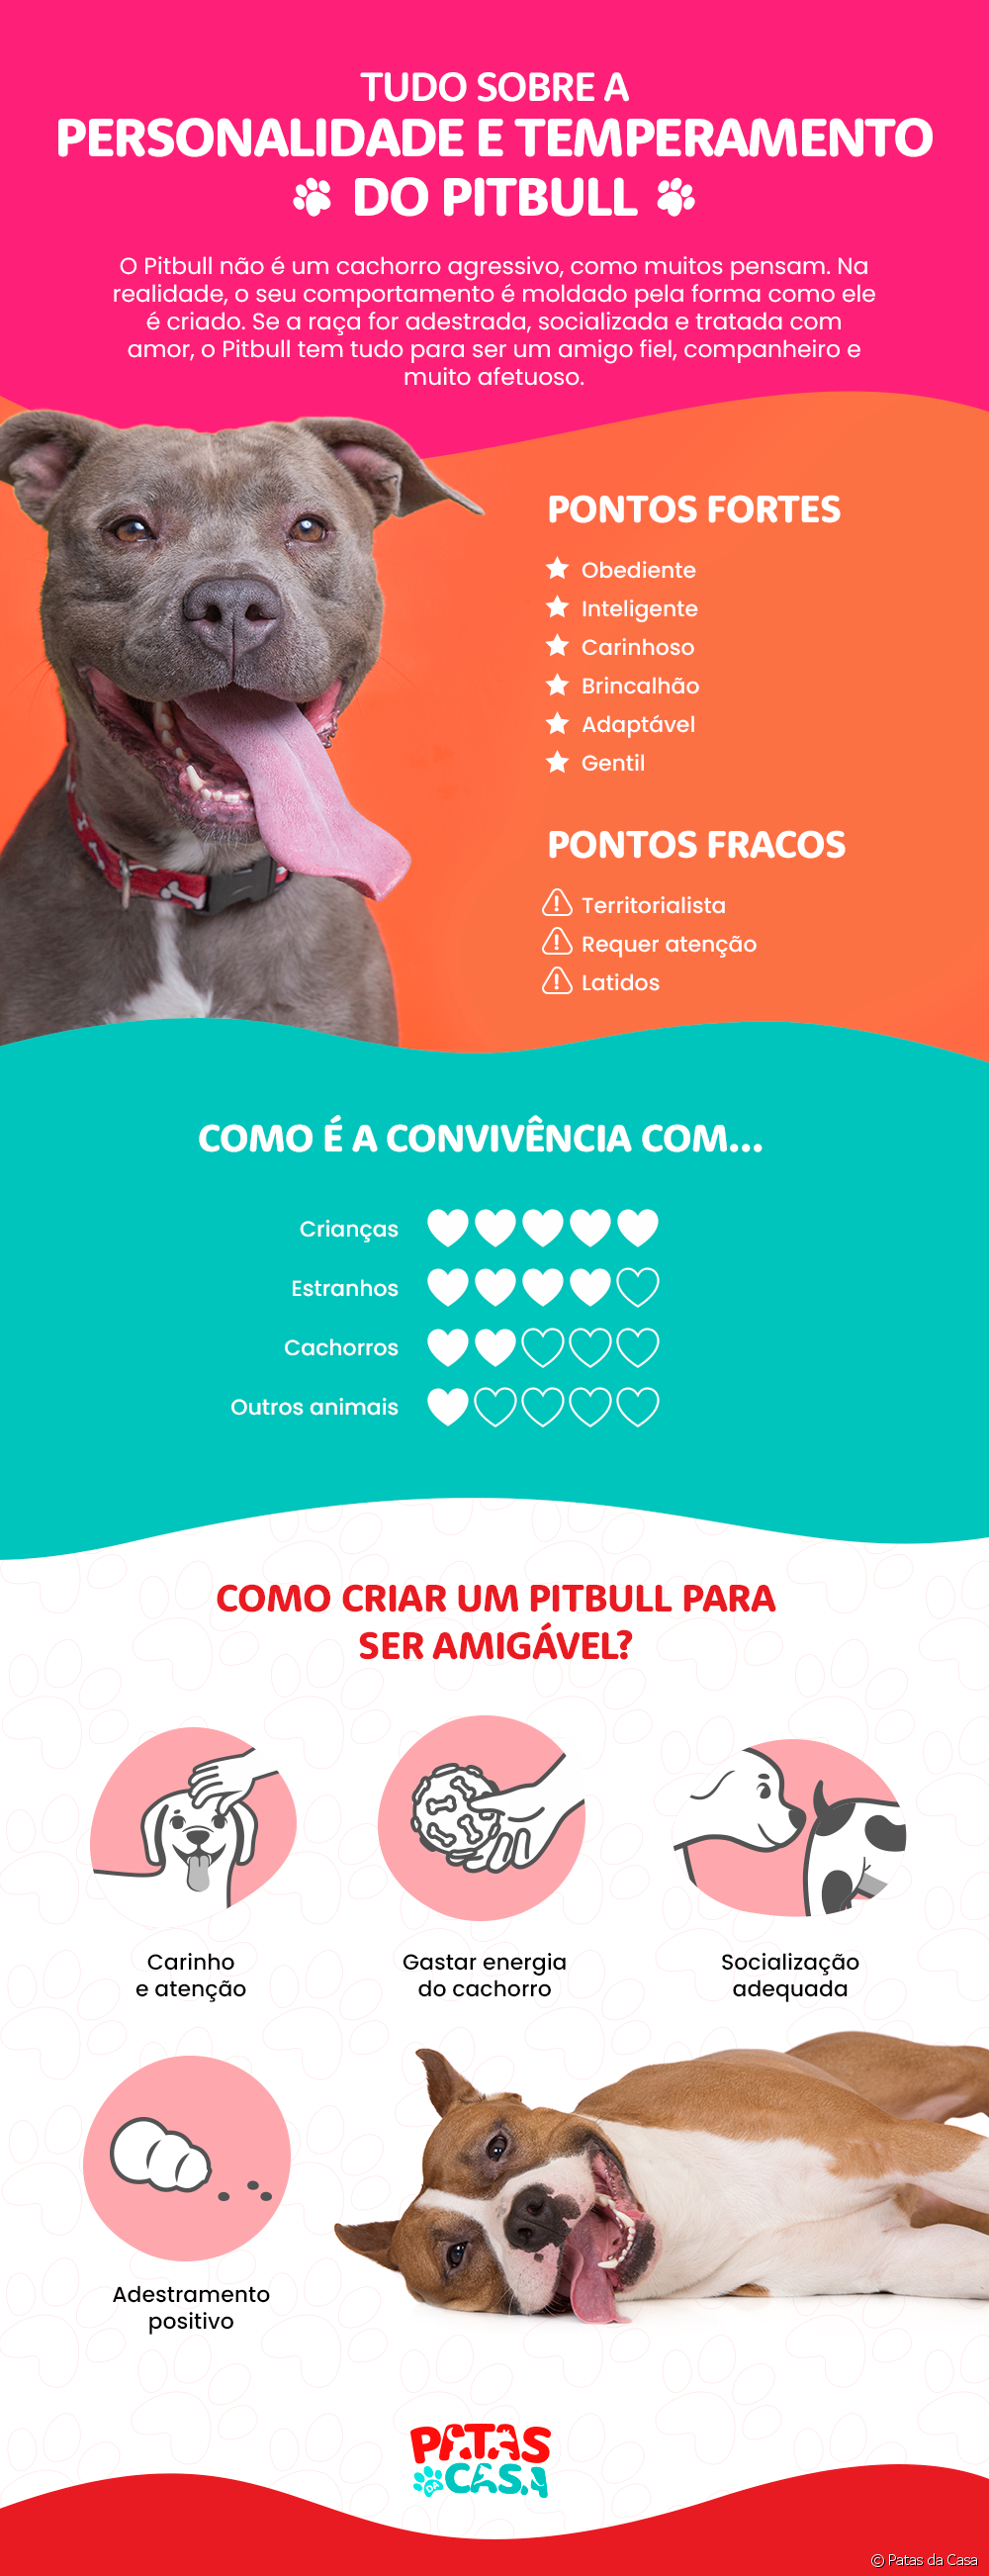  What is the Pitbull's personality like? See the infographic to learn all about the breed's temperament